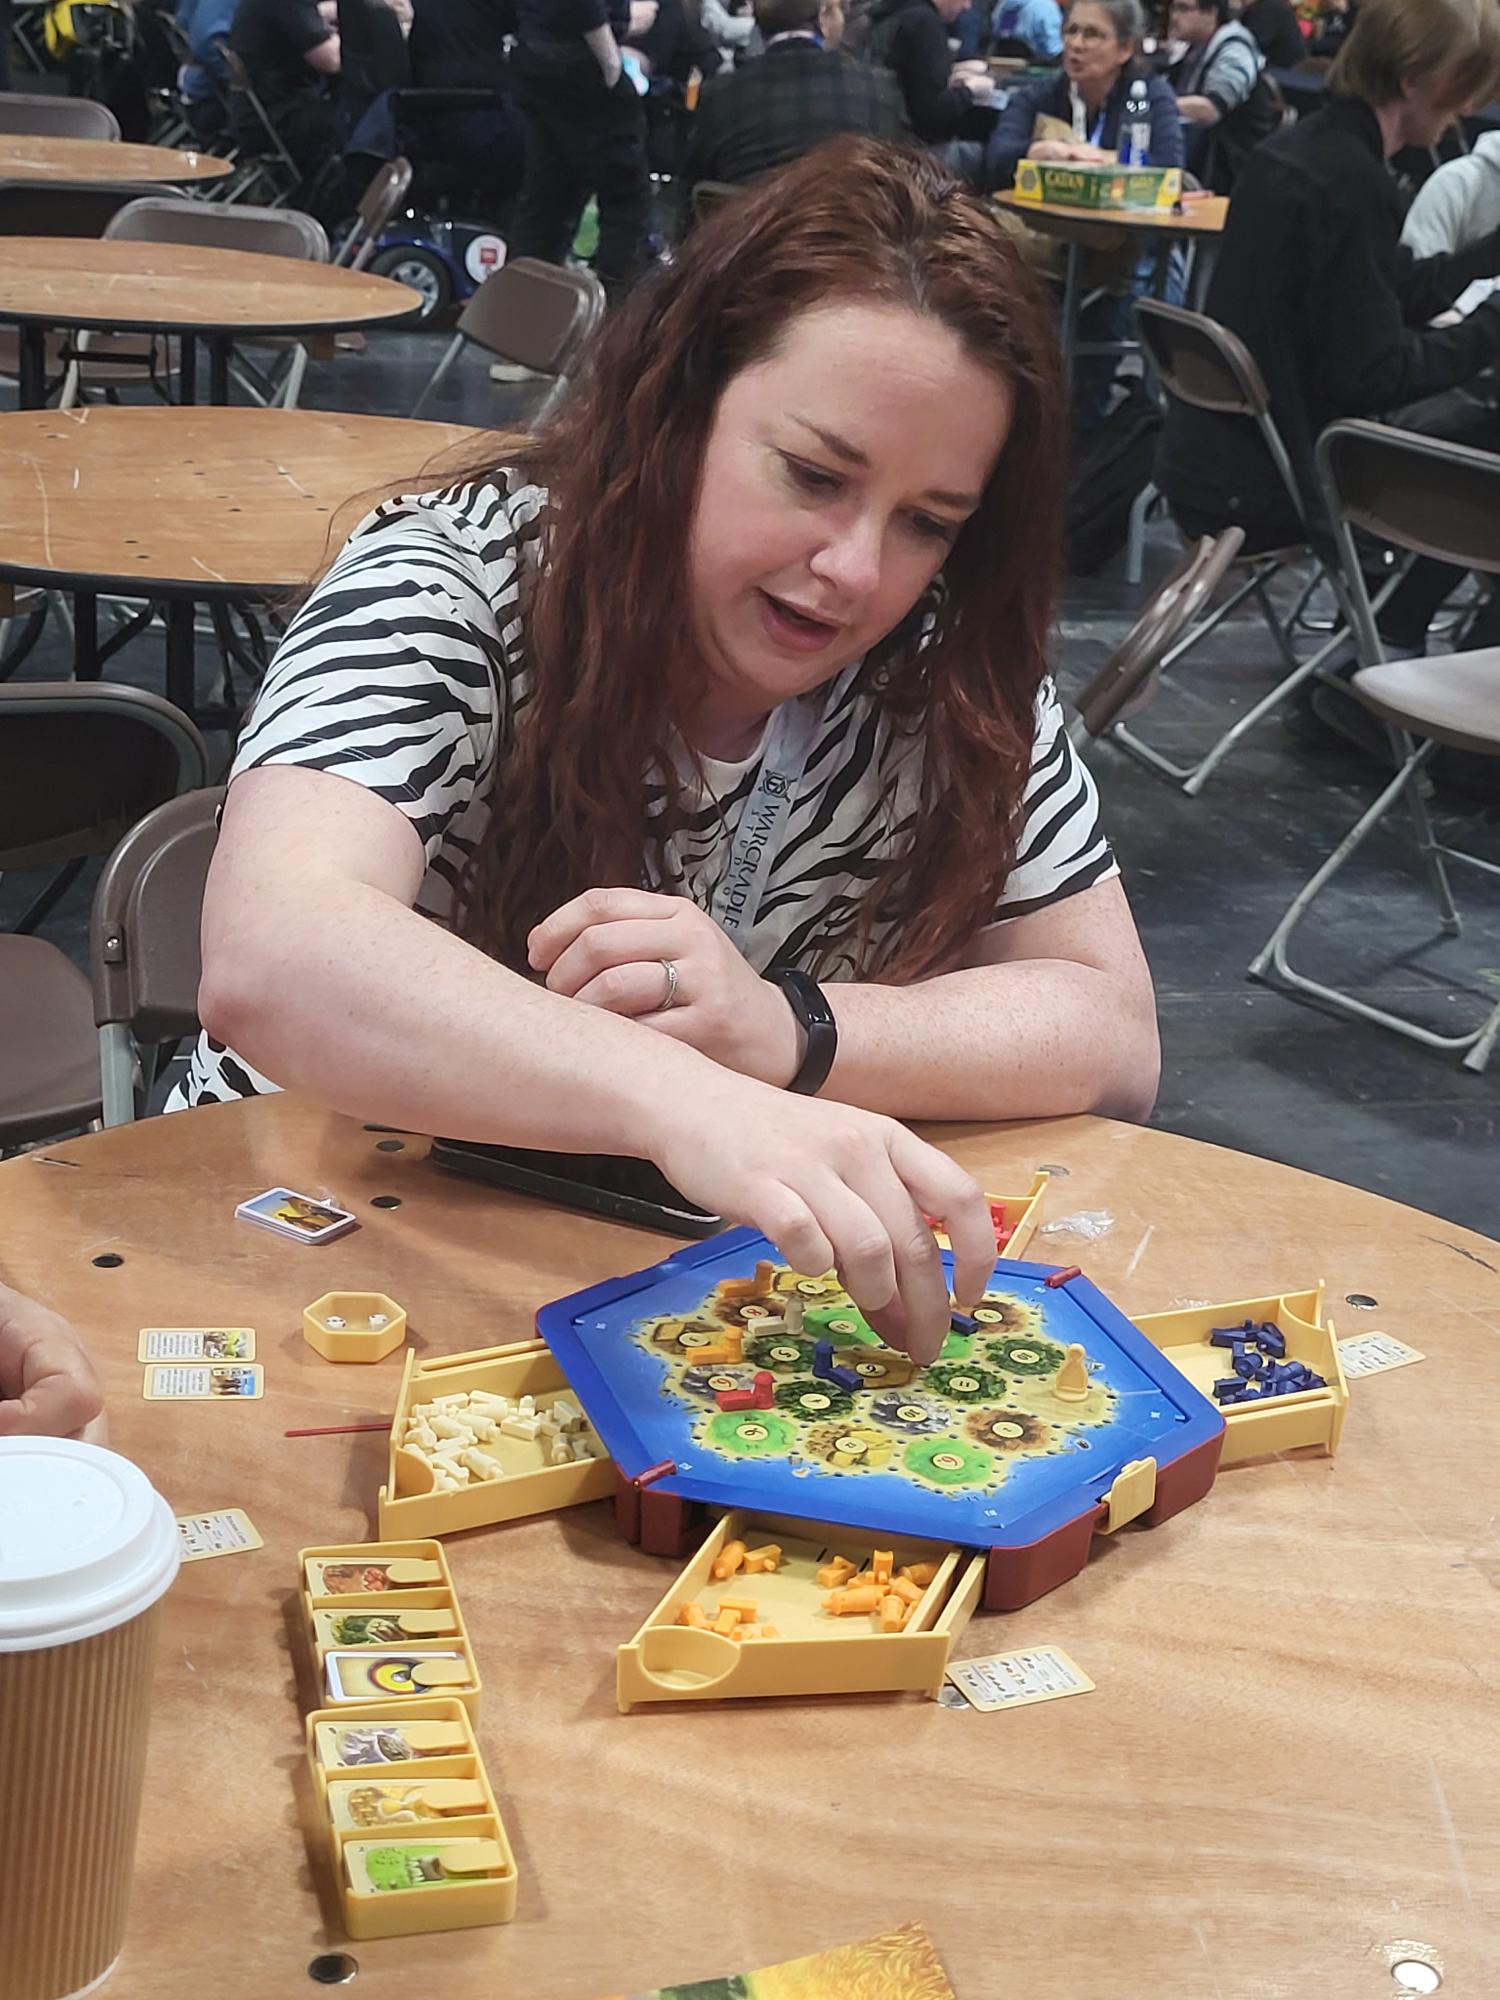 A woman with red hair is moving a piece on a small CATAN – Traveler board.